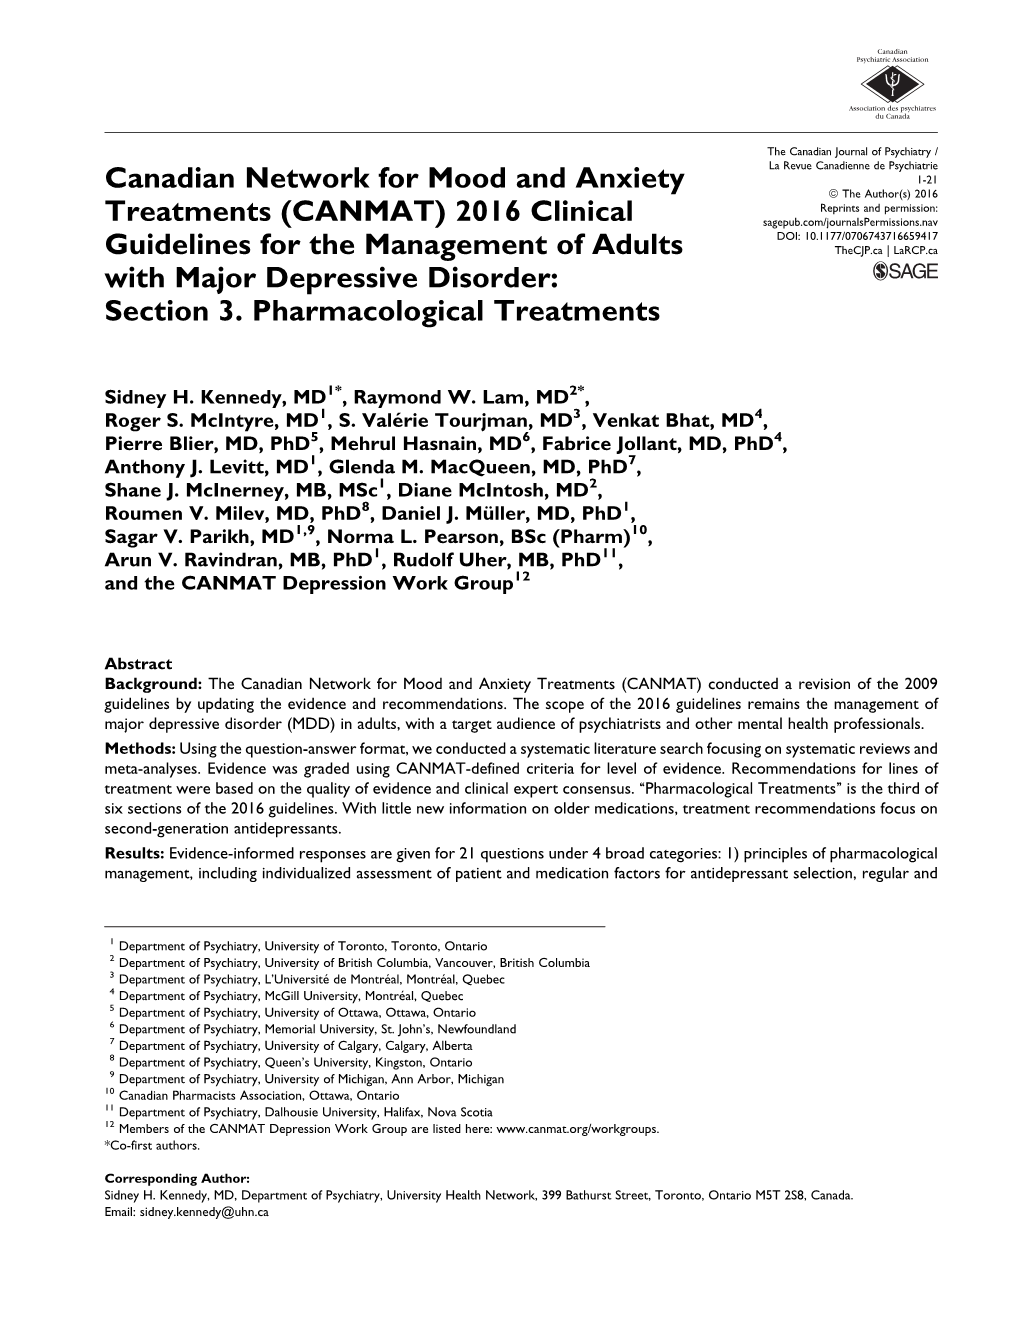 Canadian Network for Mood and Anxiety Treatments (CANMAT) 2016 Clinical Guidelines for the Management of Adults with Major Depre